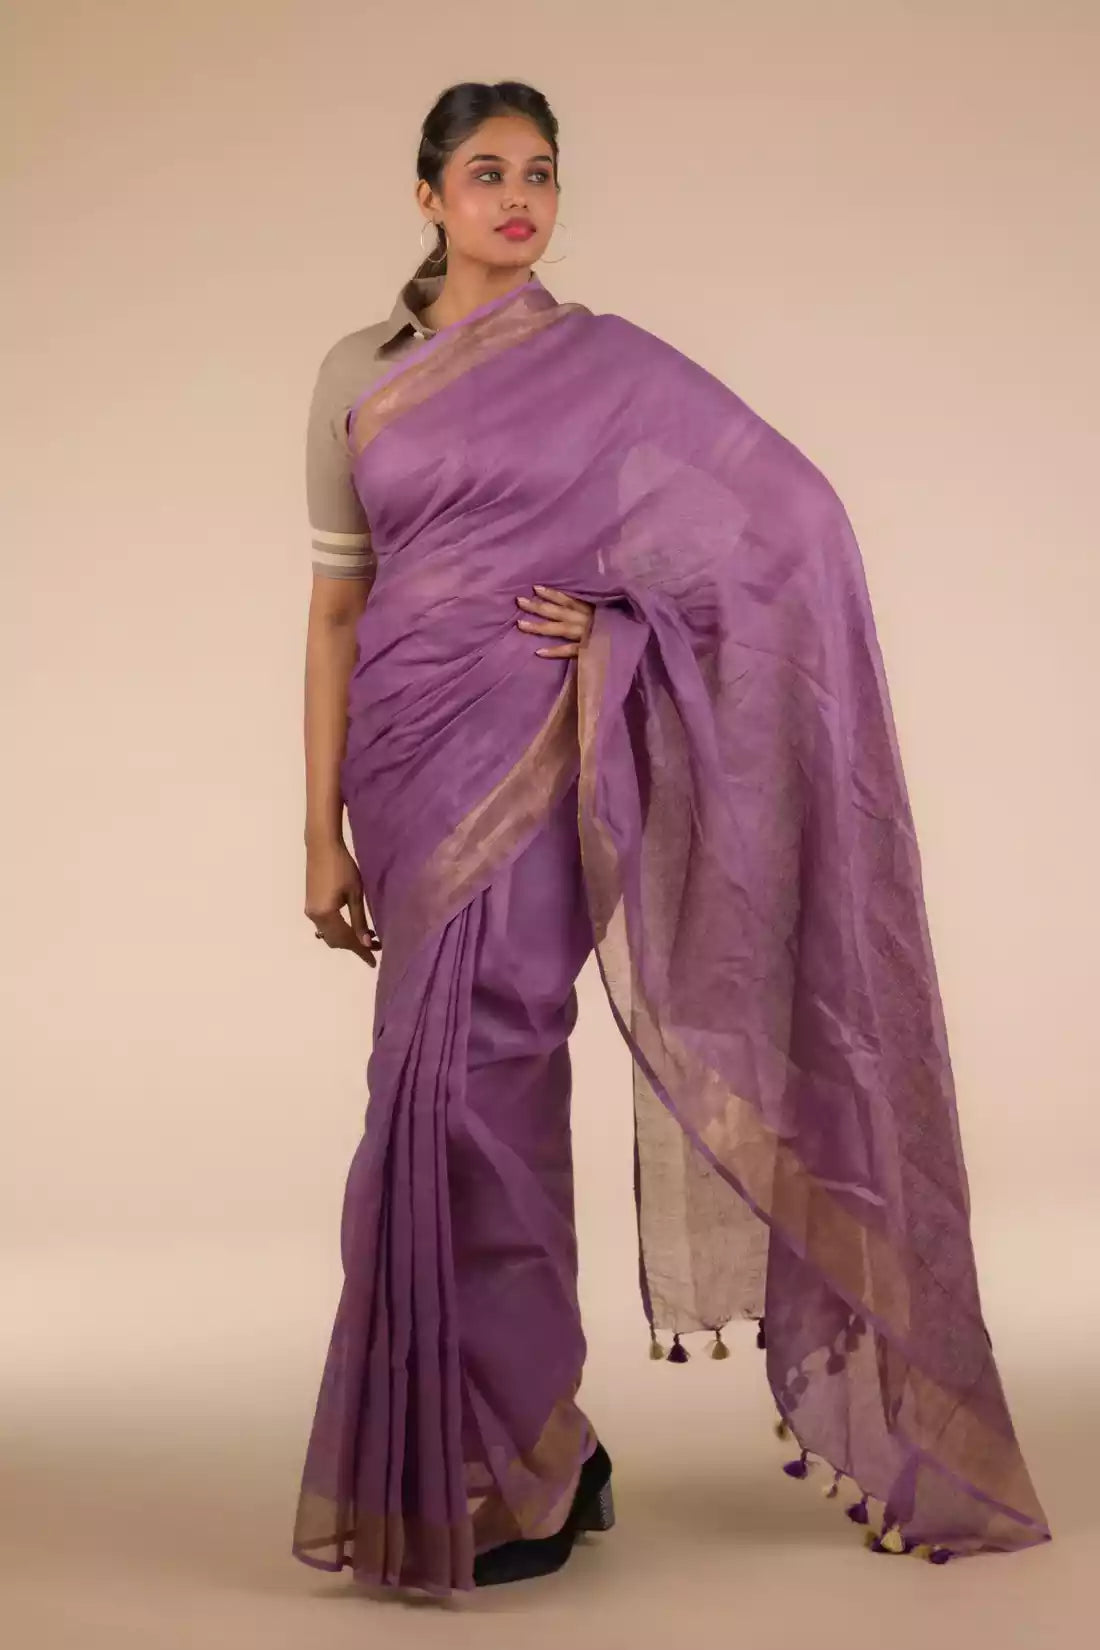 A picture of Mauve Bloom Linen Saree in Dark Purple, womens workwear standing against a grey background